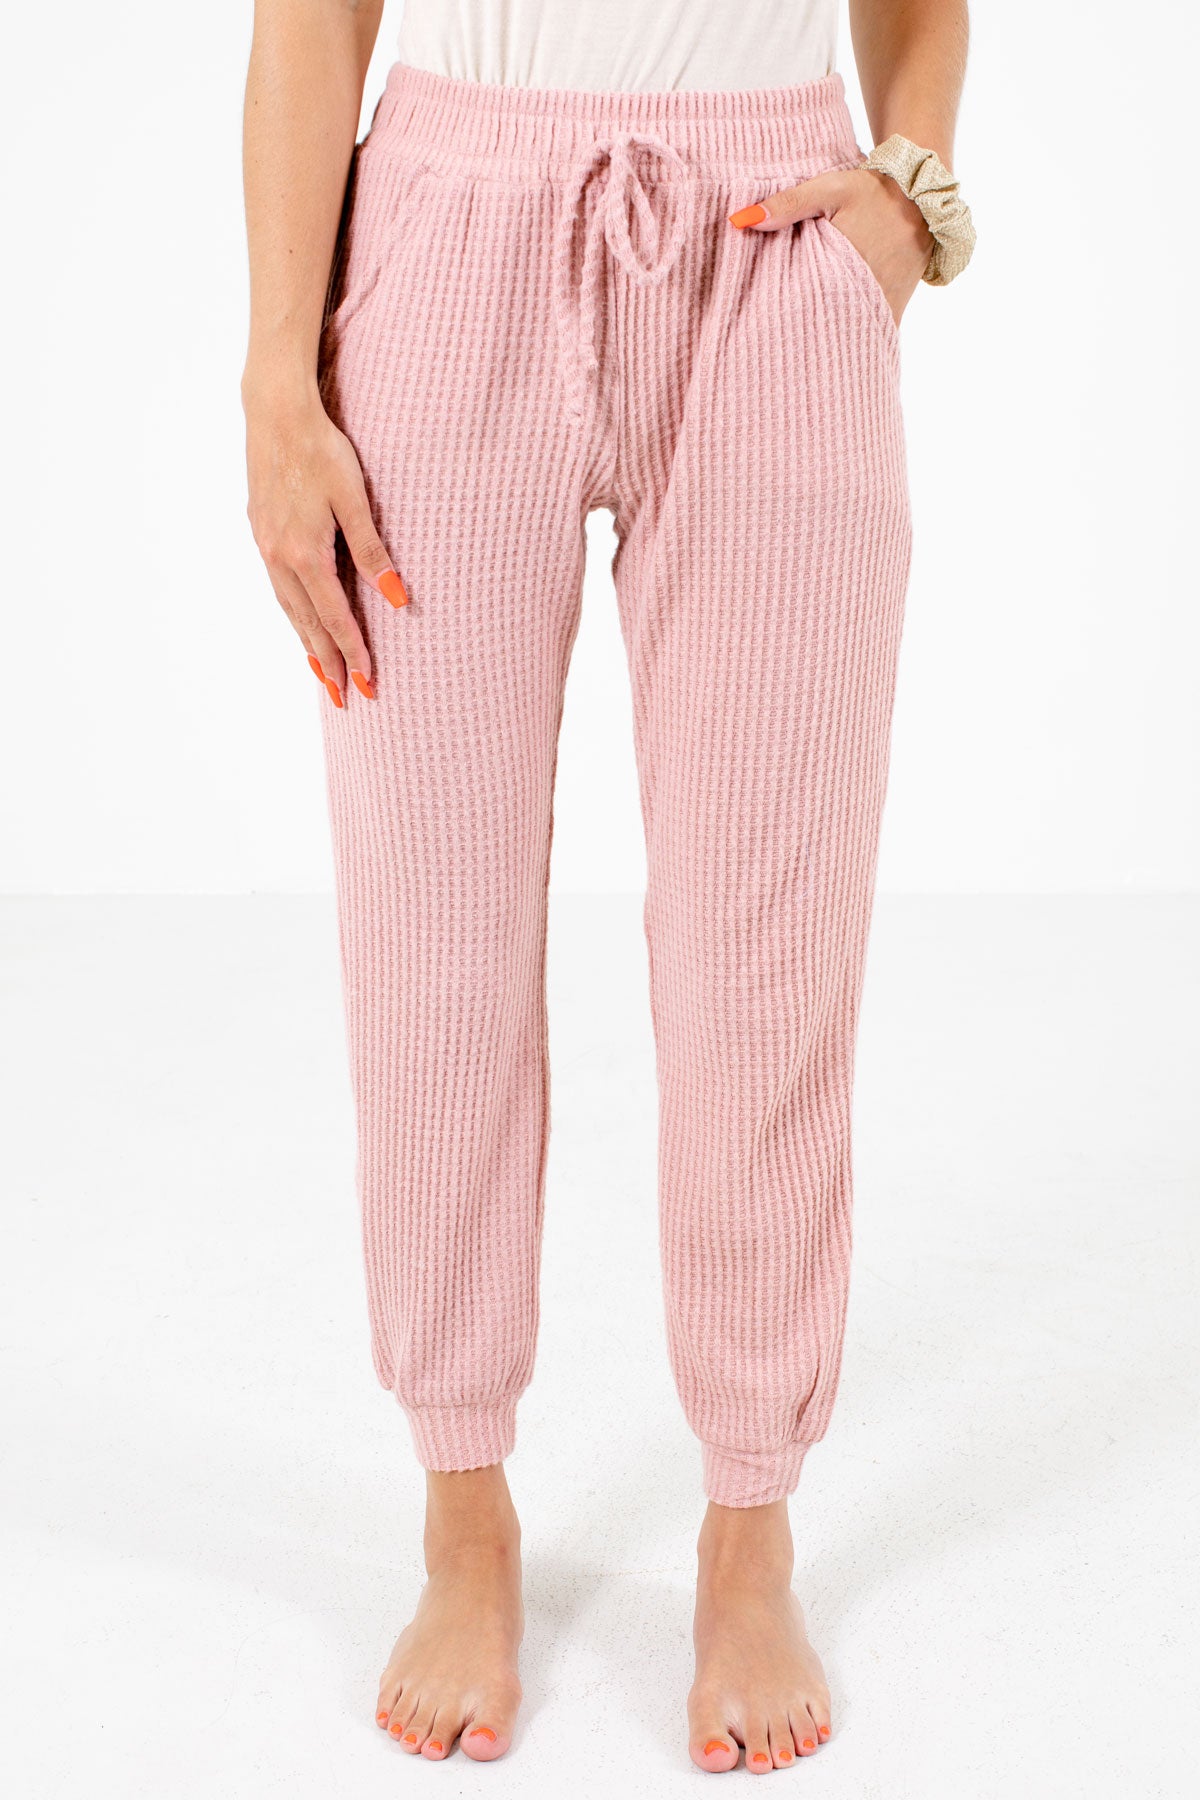 Pink Waffle Knit Material Boutique Pants for Women